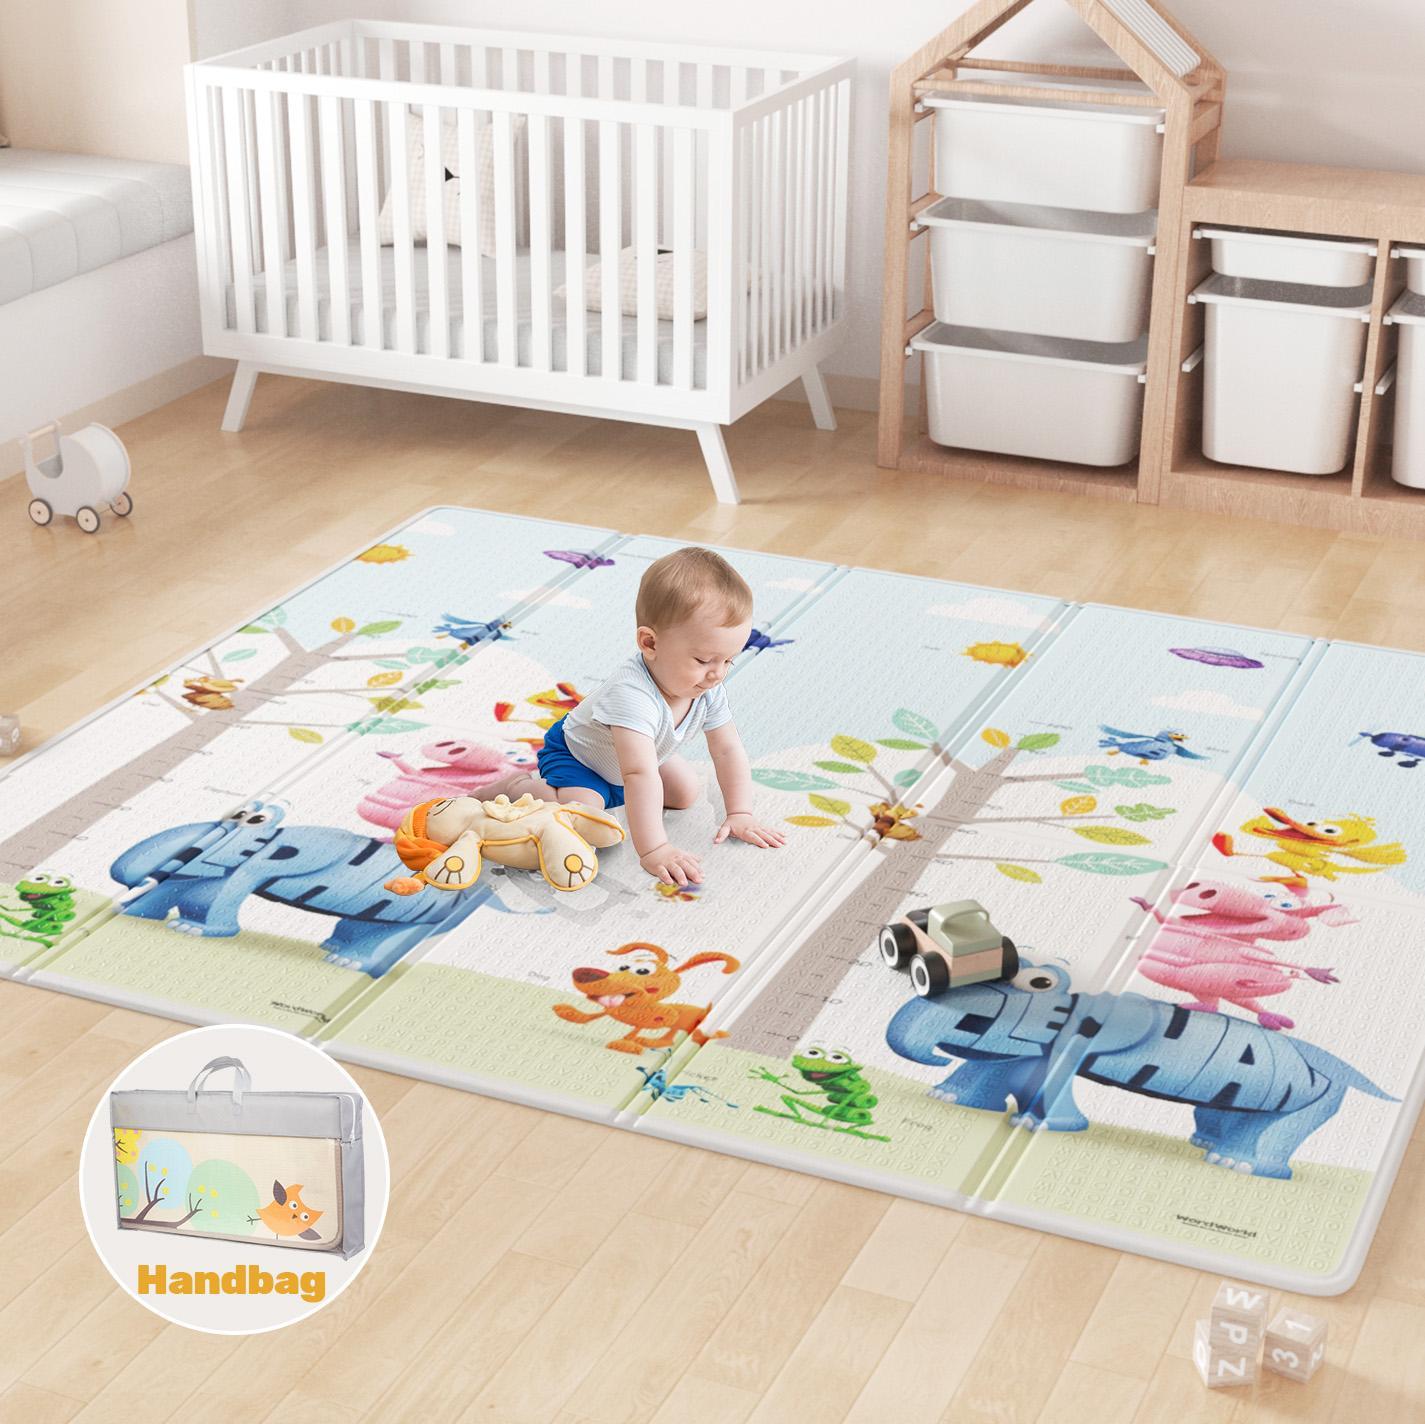 Advwin Foldable Baby Play Mat 180*200*1cm Extra Large Reversible Waterproof Activity Playmats Foam Floor Crawling Mat with Travel Bag